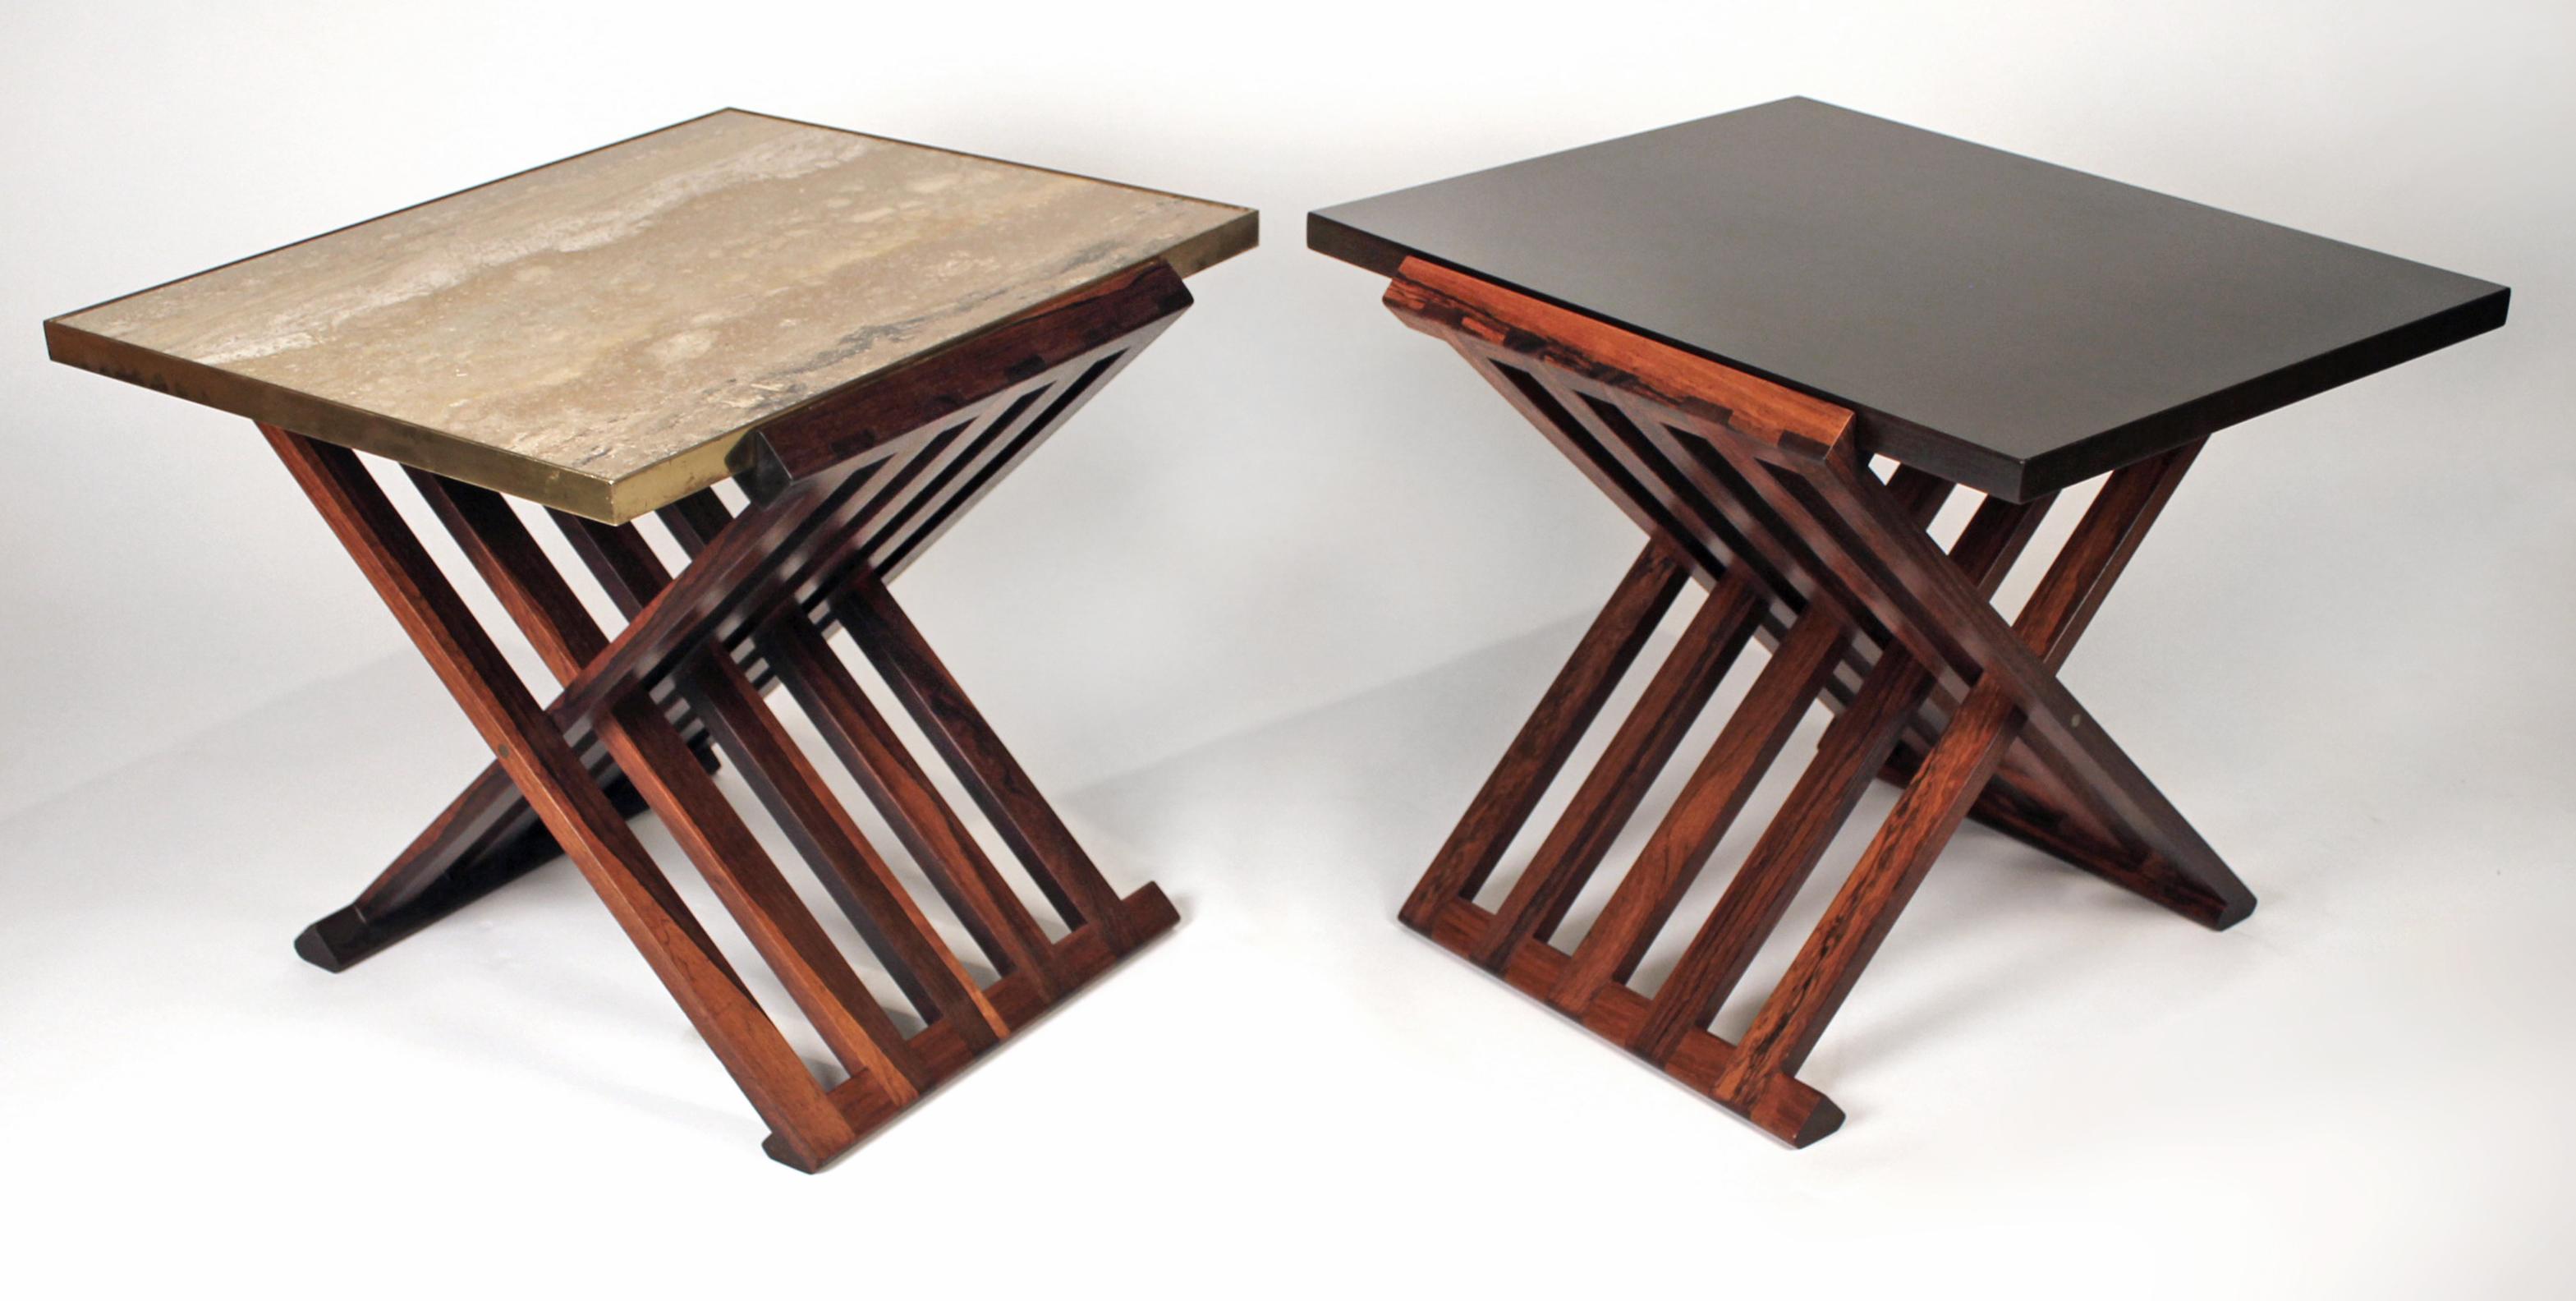 Solid Brazilian rosewood X-base occasional tables designed by Edward Wormley model number 5425.

One table has a mahogany top with the original Dunbar 